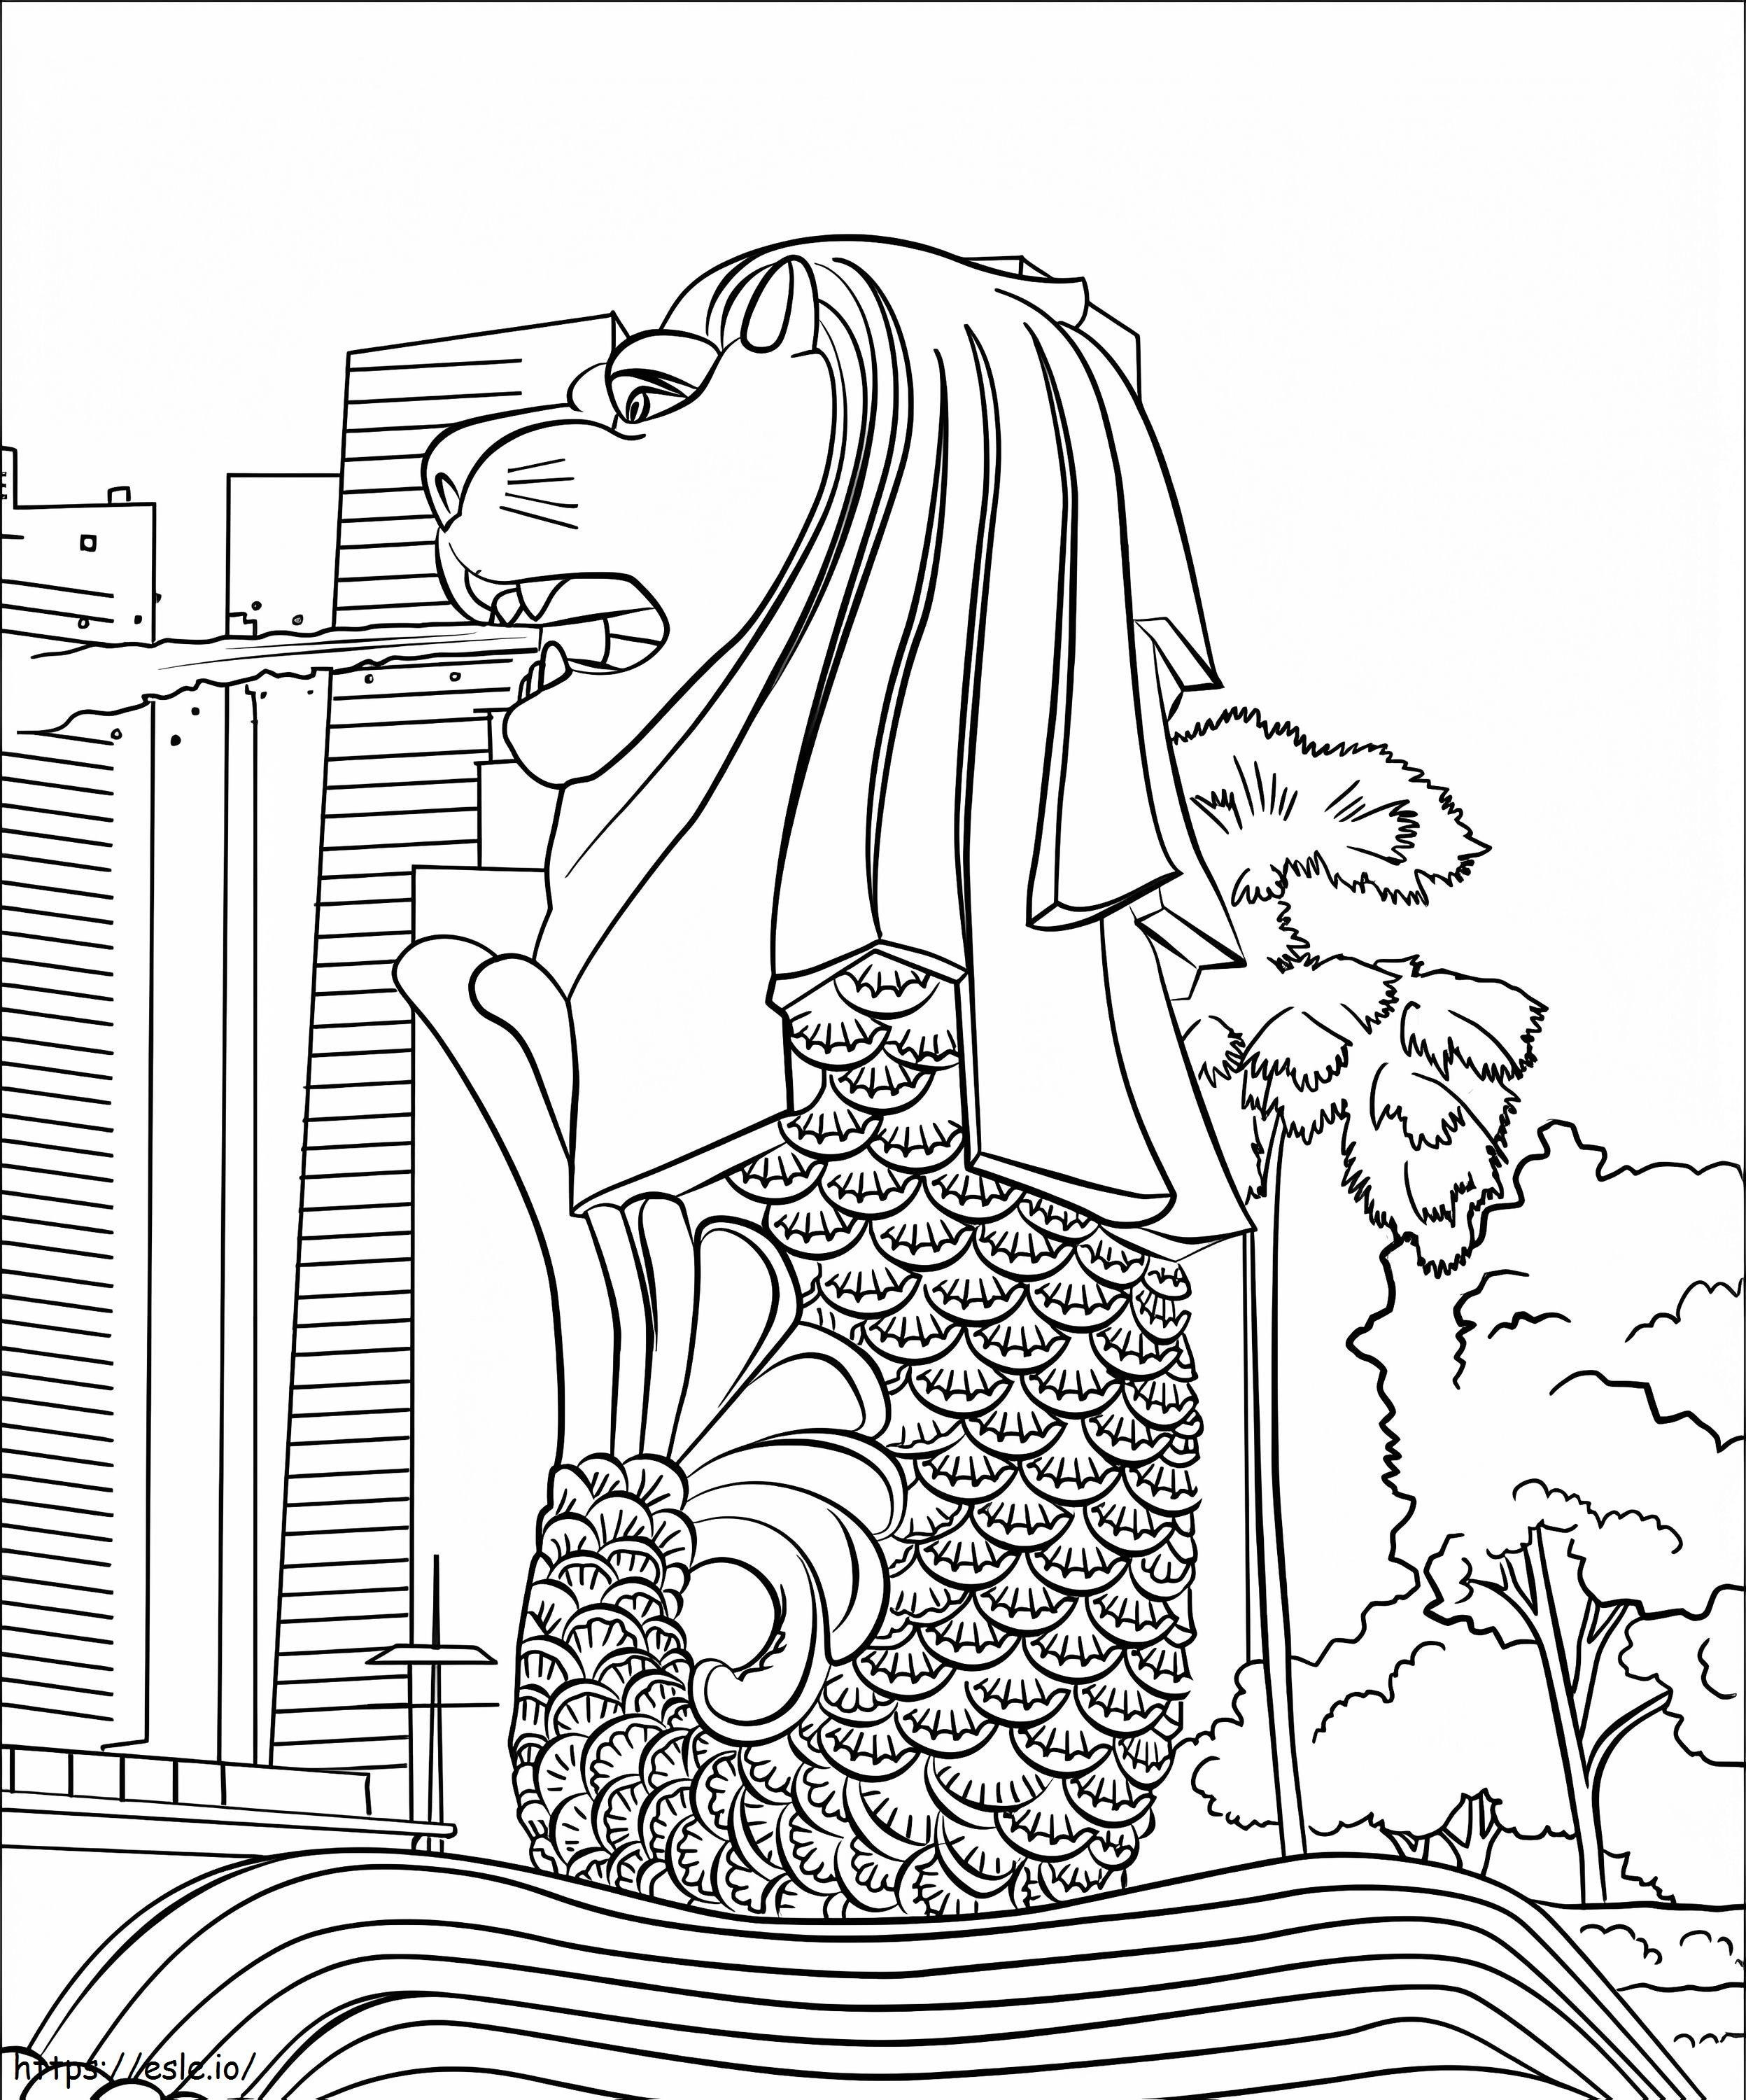 Singapore Merlion coloring page